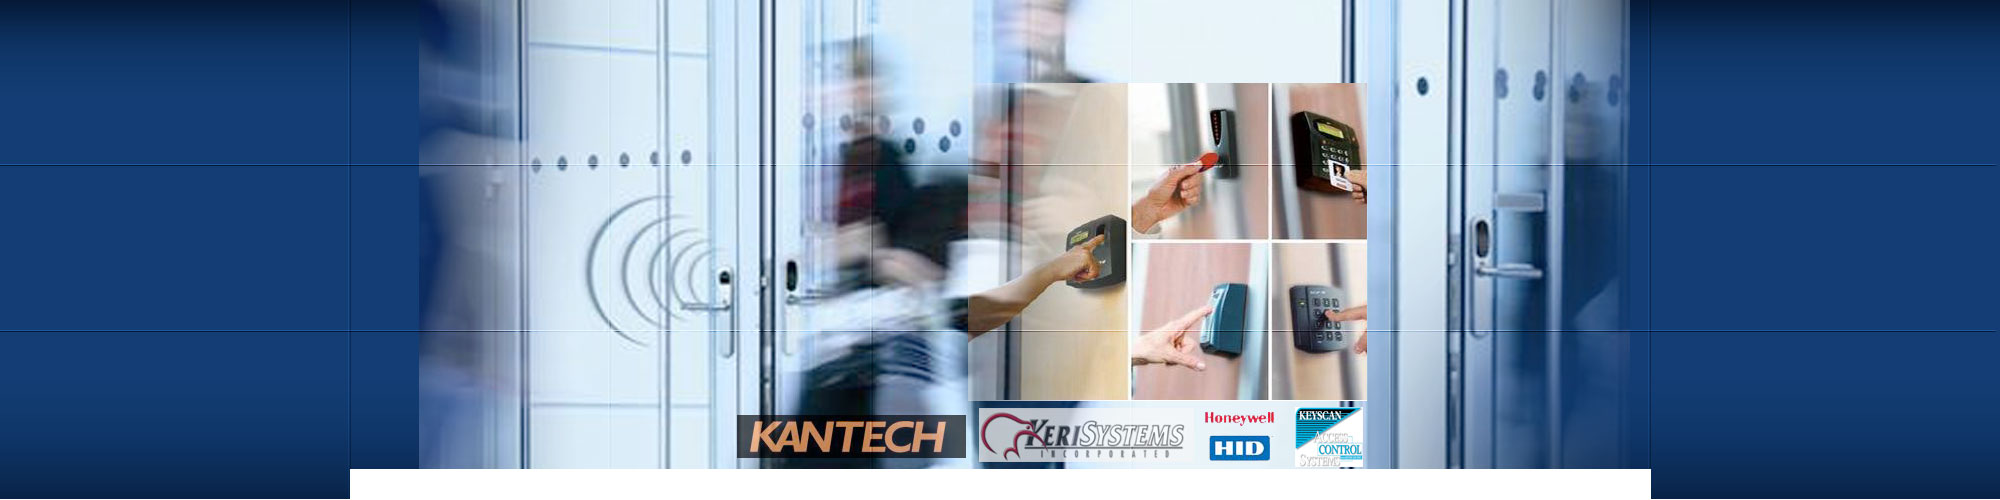 ACCESS CONTROL SYSTEMS